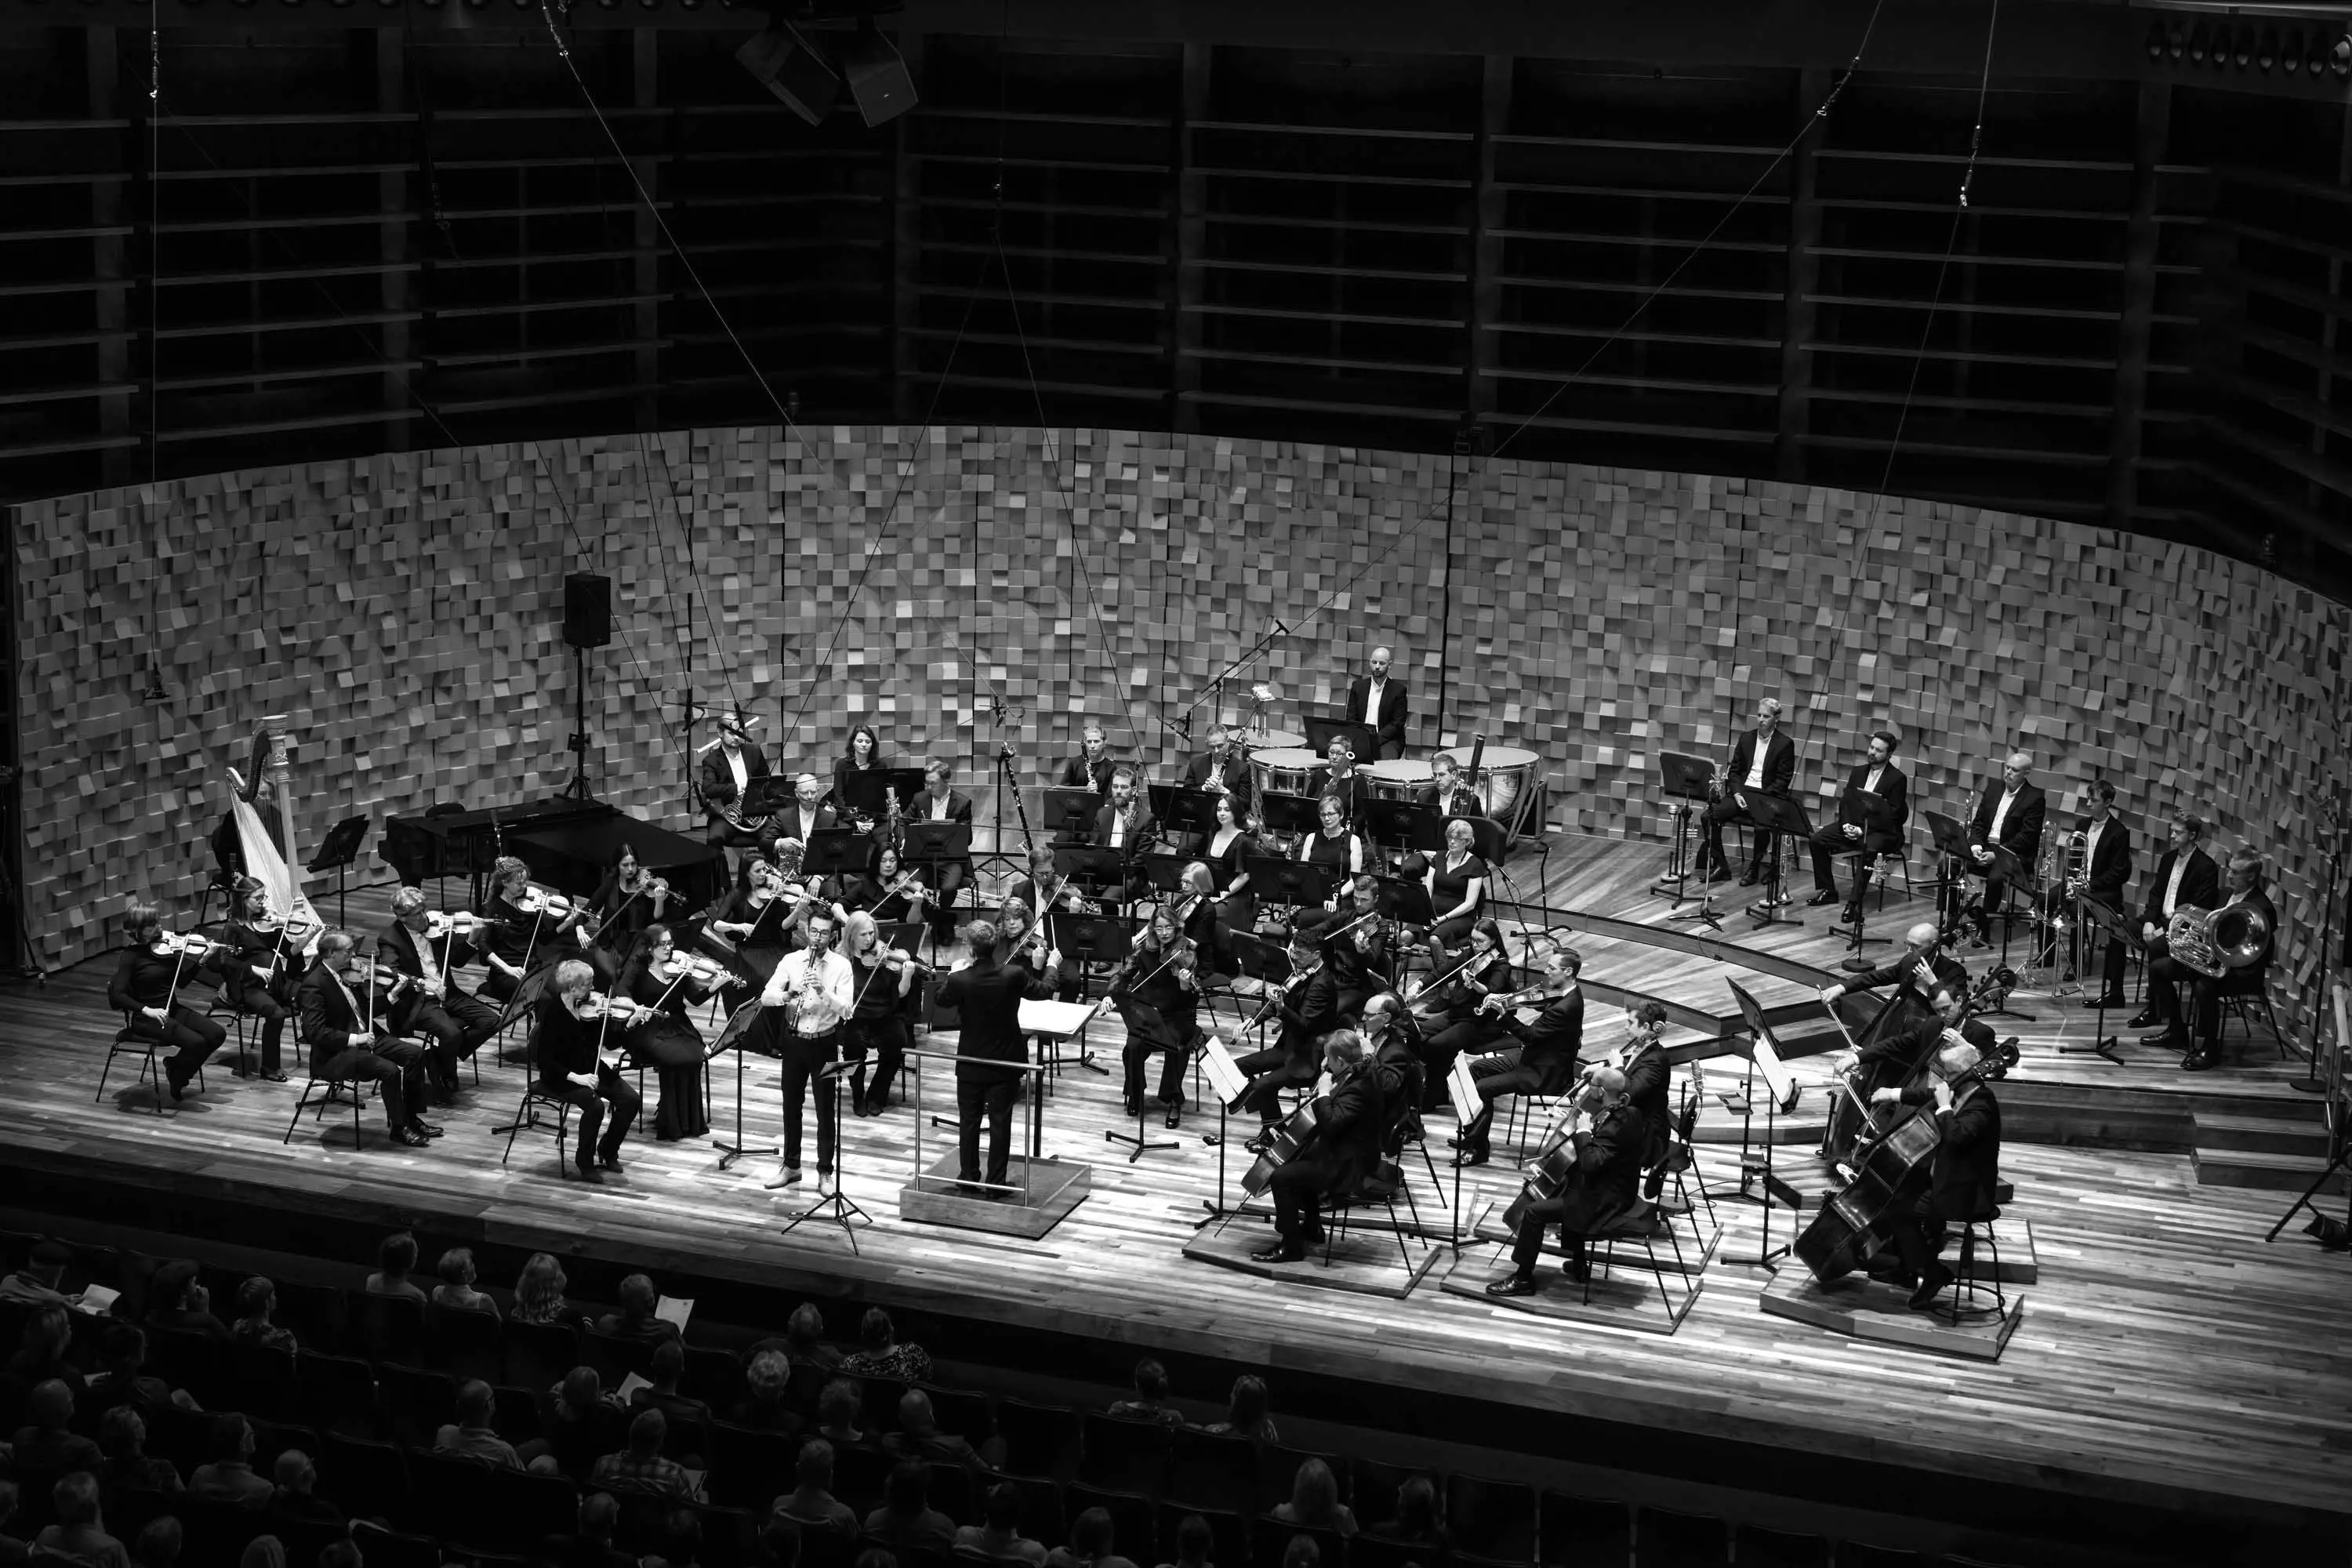 A large orchestra, seated on a semi-circle shaped stage plays in front of a large audience inside an auditorium.